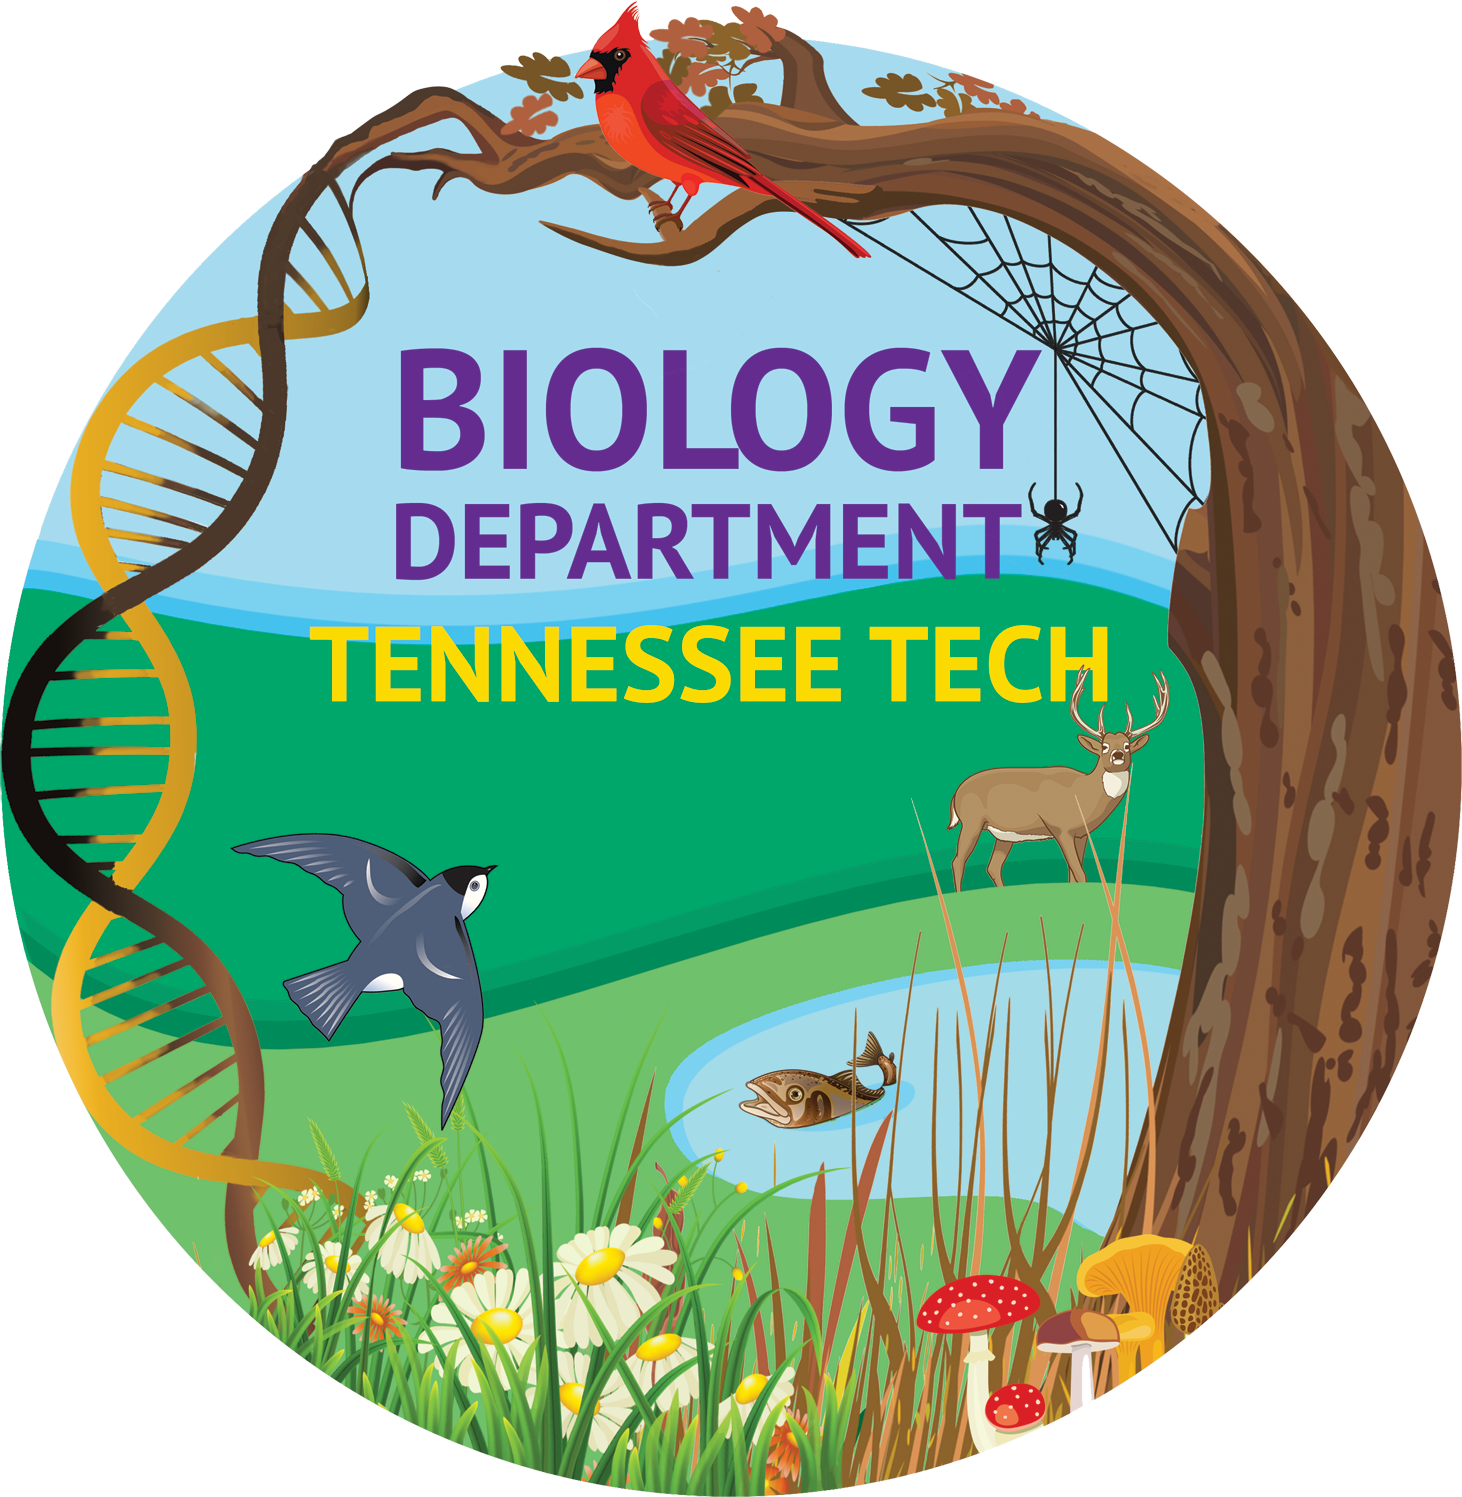 Biology Department at Tennessee Tech Logo; a scene with a tree, grassy hillside, a small poind, flowers, birds, and so on.